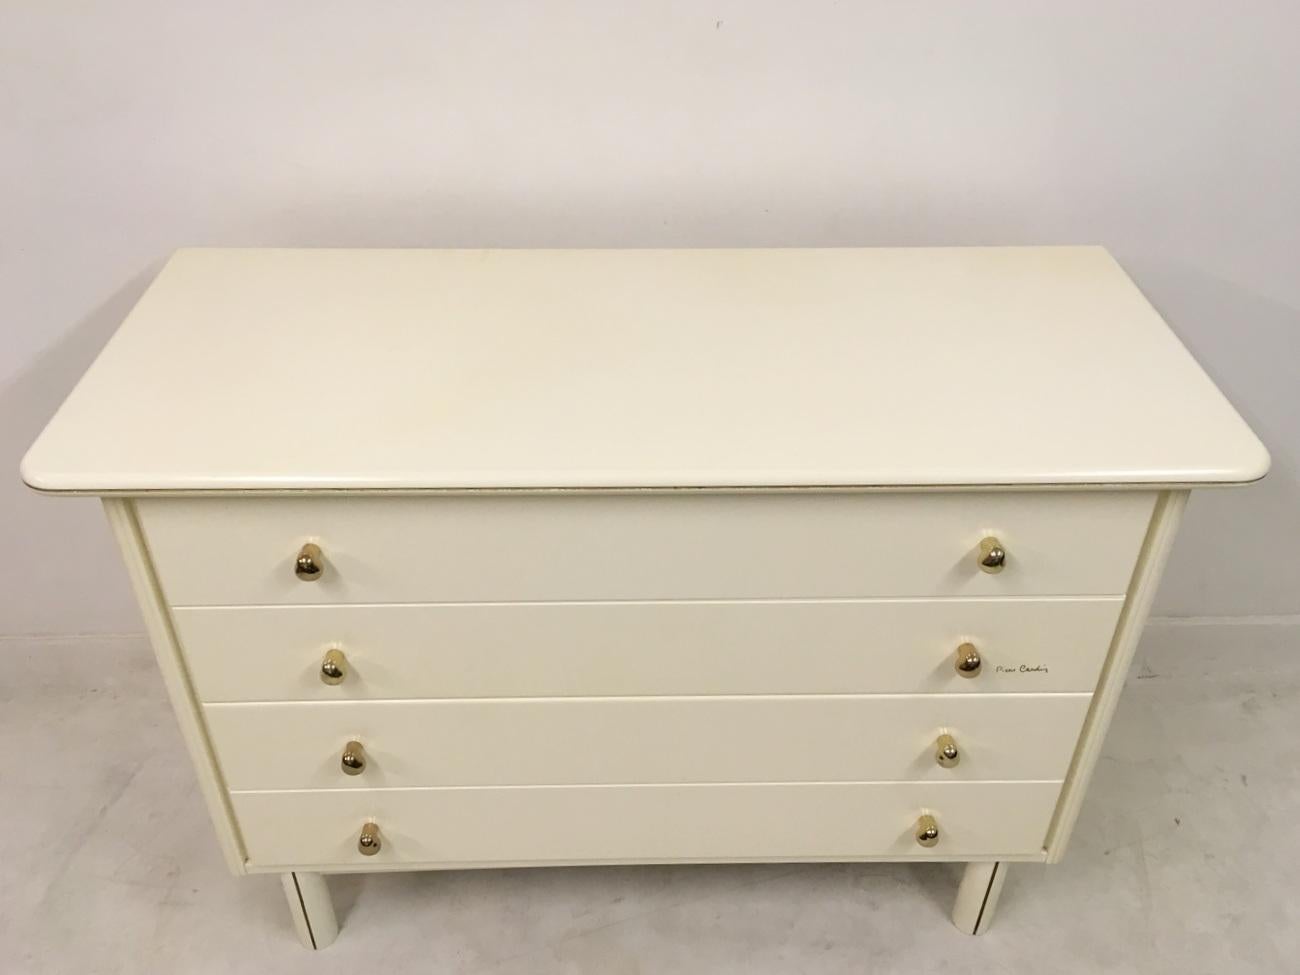 Lacquered Vintage 1980s Chest of Drawers by Pierre Cardin For Sale